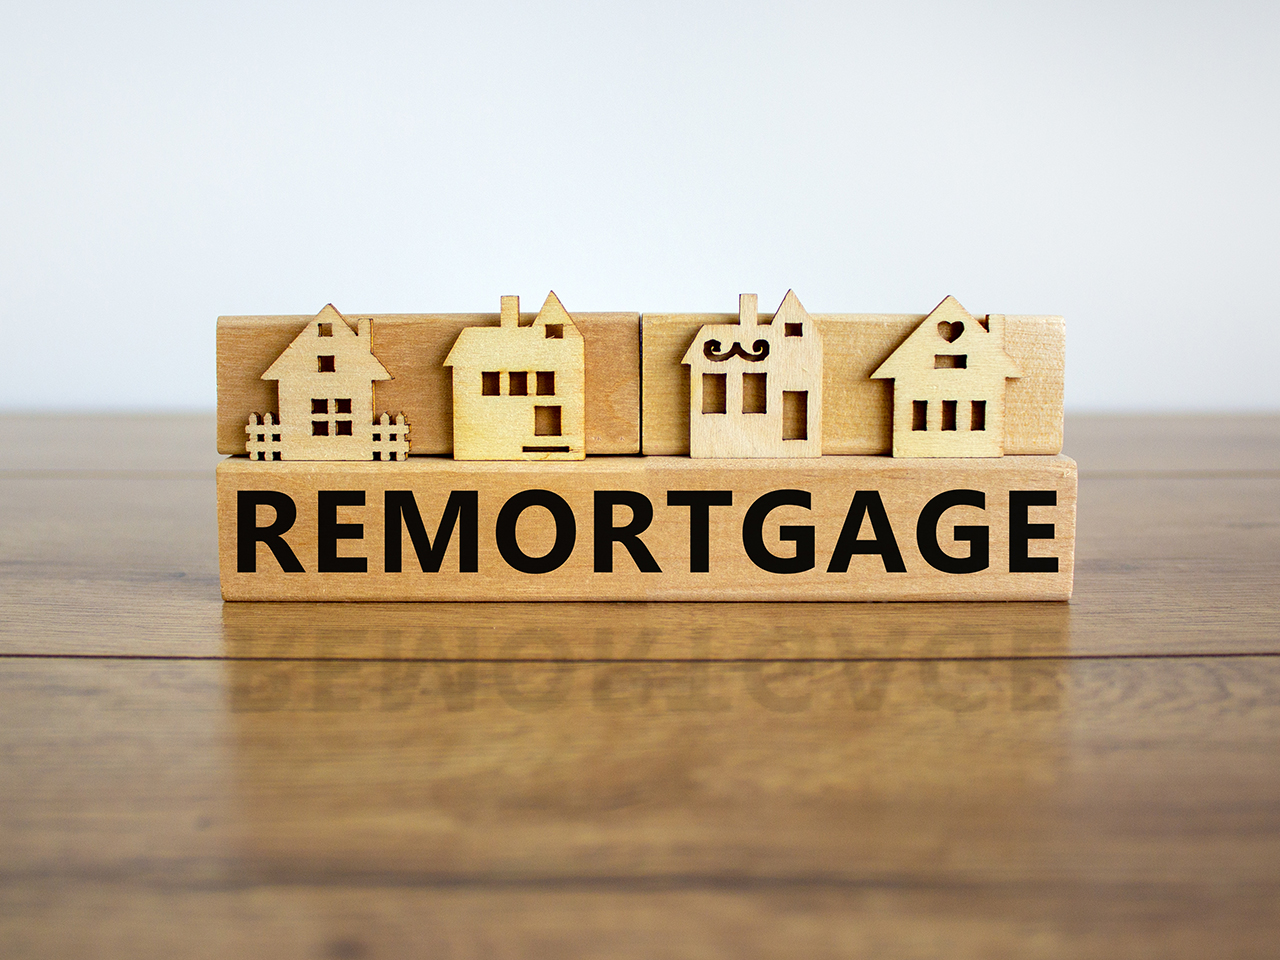 https://apmortgagesolutions.co.uk/wp-content/uploads/2021/07/remortgage-1.jpg